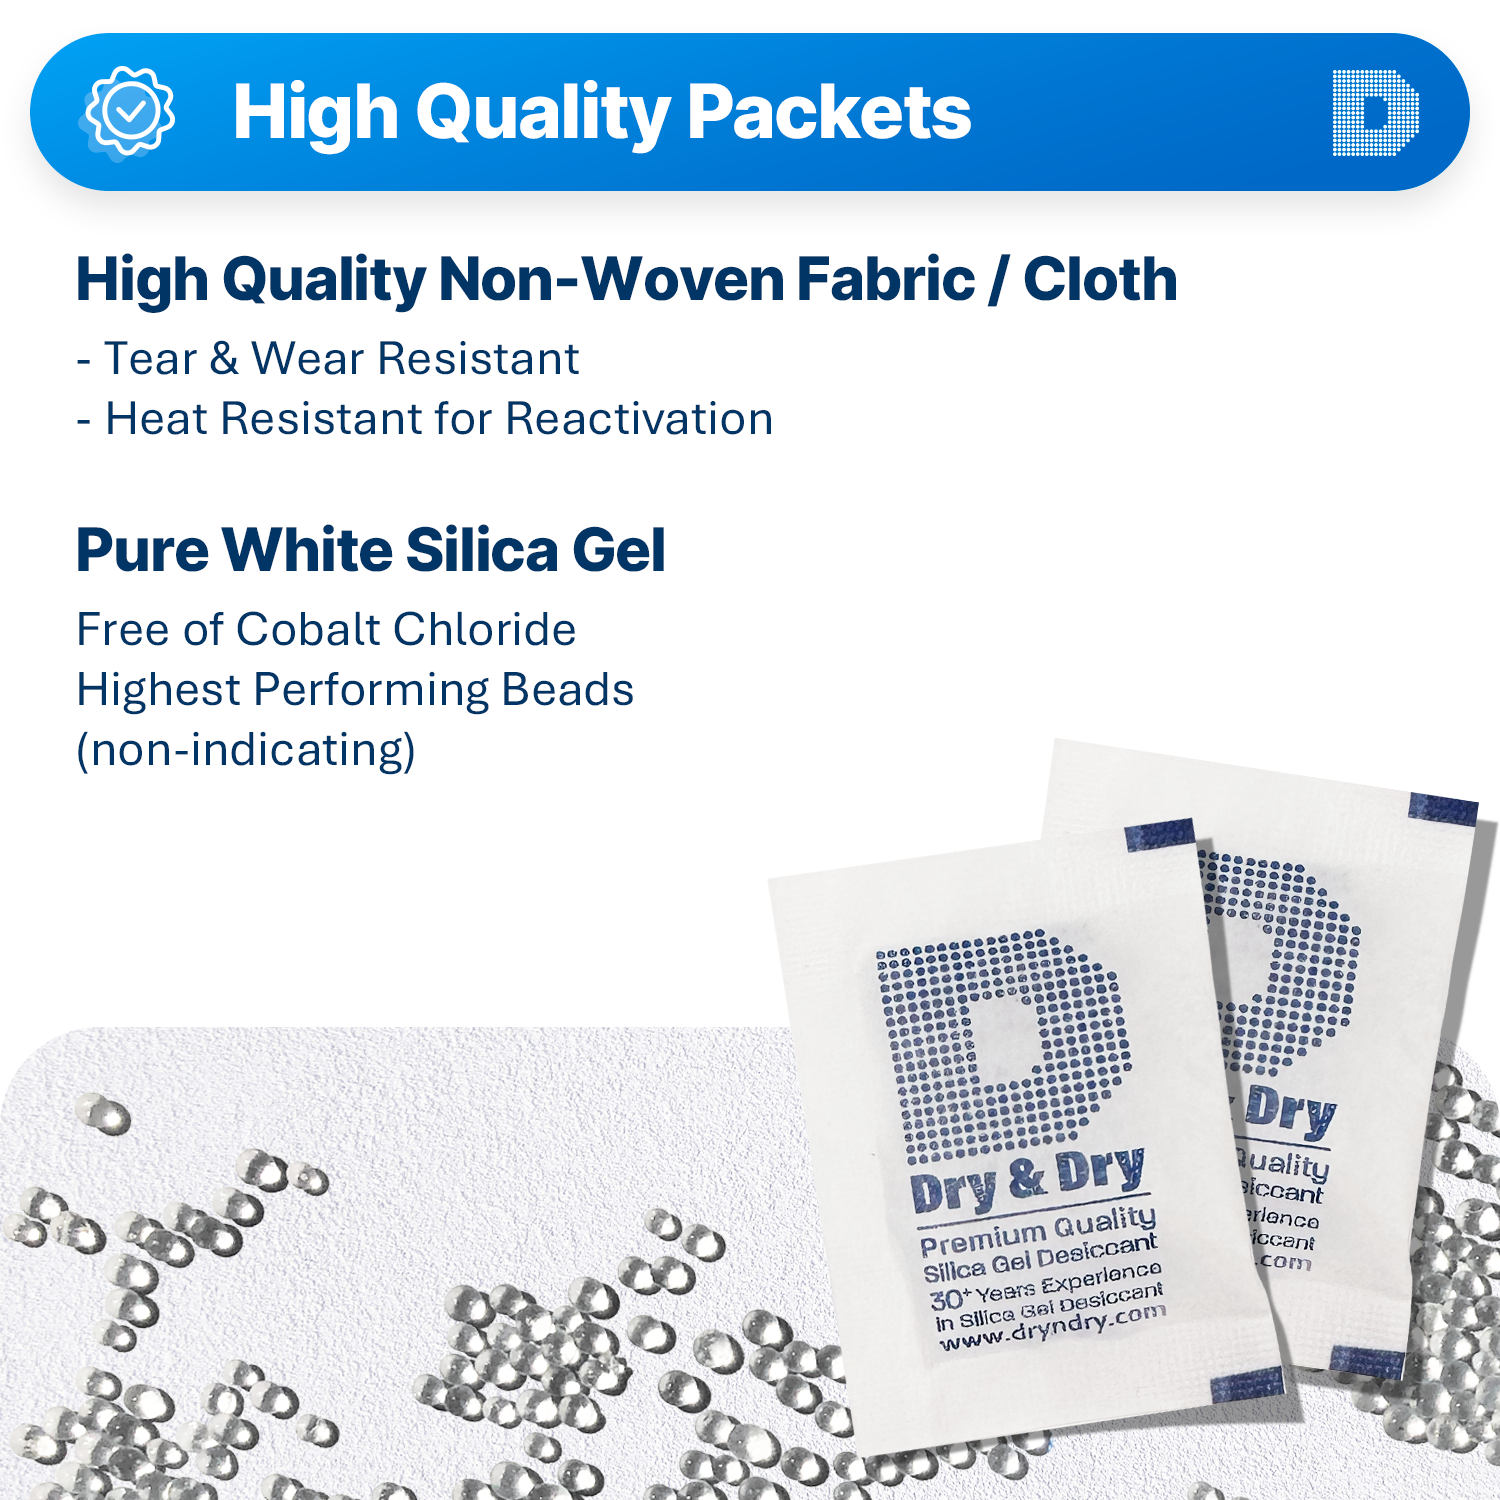 5 Gram Non-Woven Fabric(Cloth) Packets